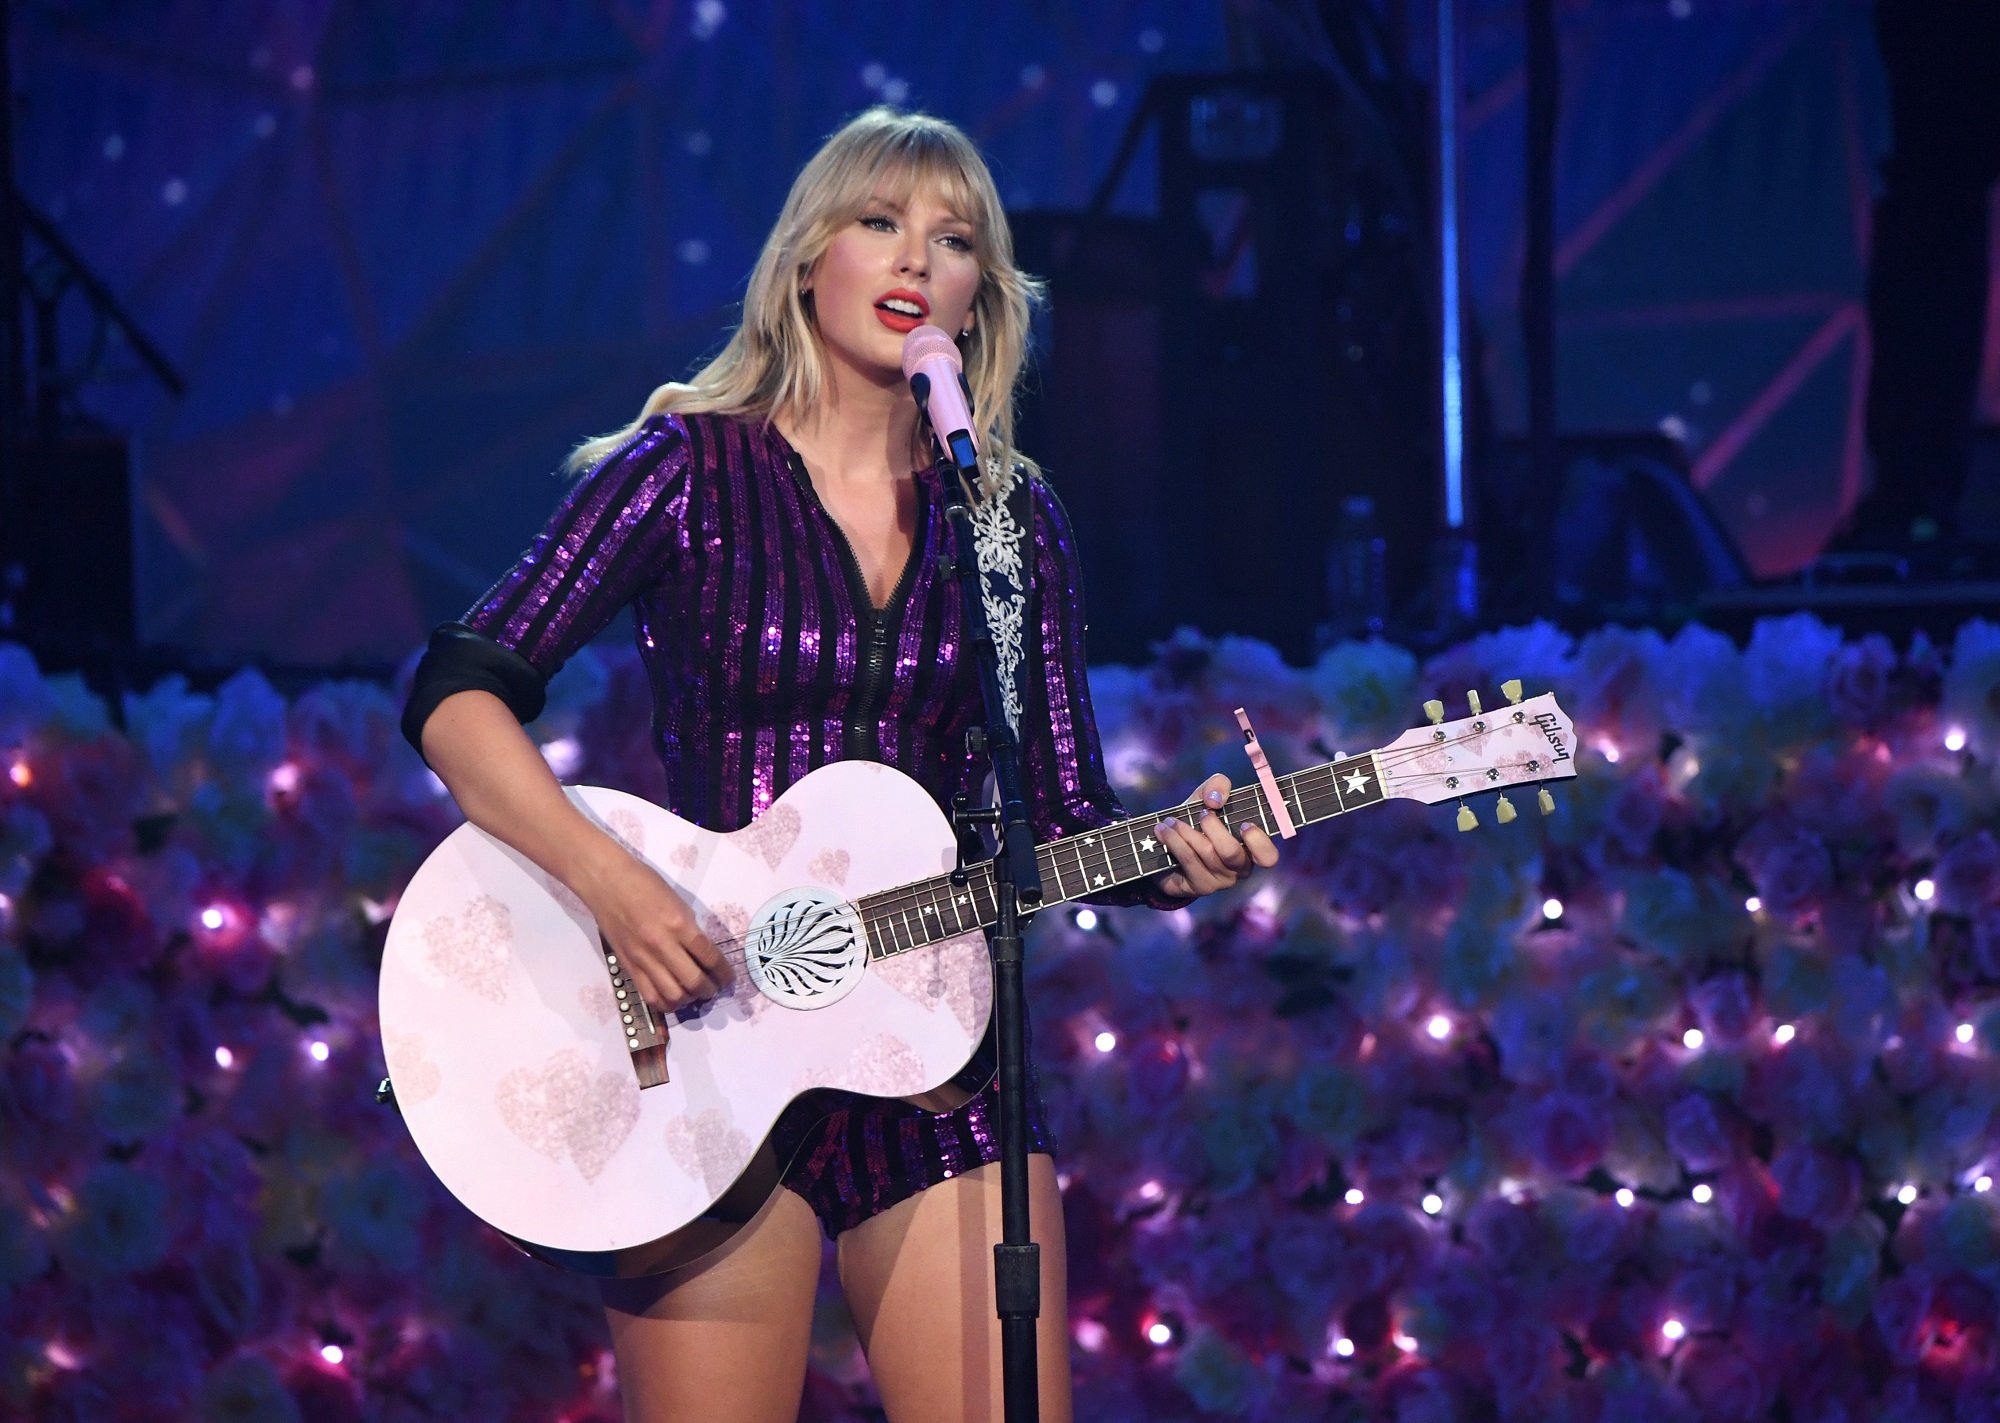 Taylor Swift performs onstage at The Prime Day concert on July 10, 2019 in New York City.